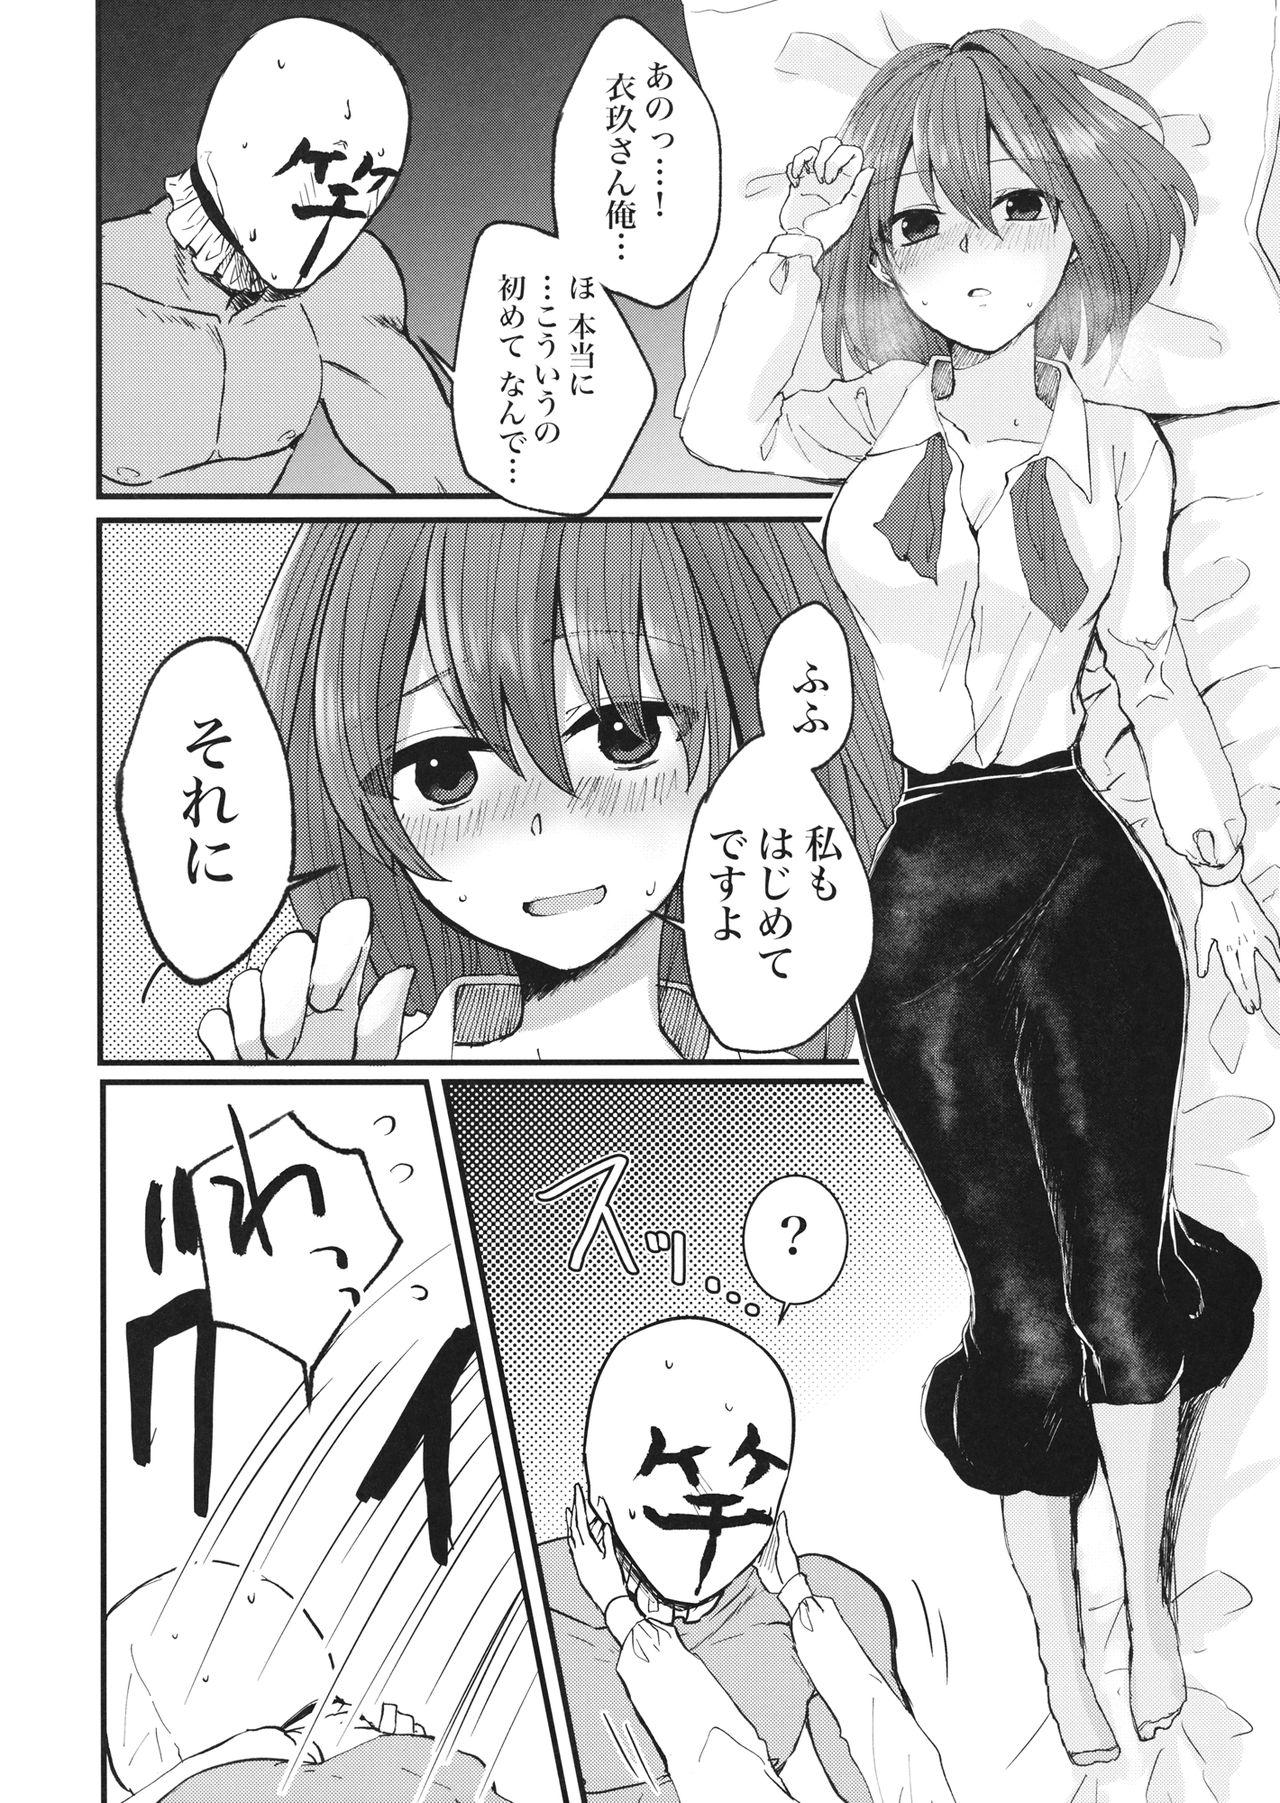 Game 衣玖さんと一緒に色々頑張る本 - Touhou project Private Sex - Page 11